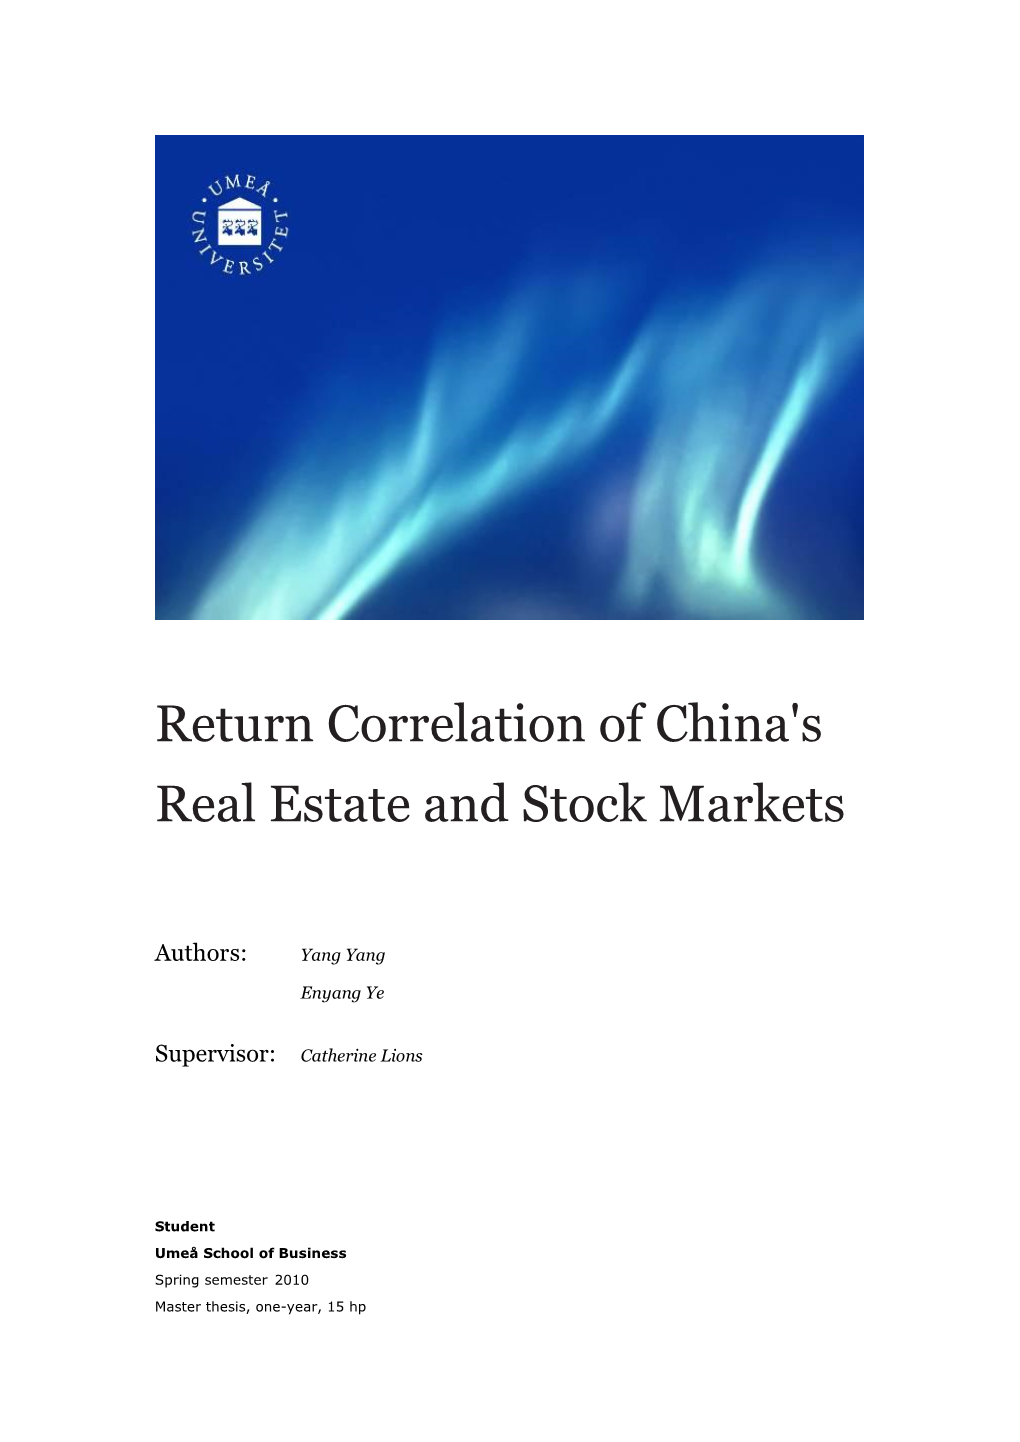 Return Correlation of China's Real Estate and Stock Markets